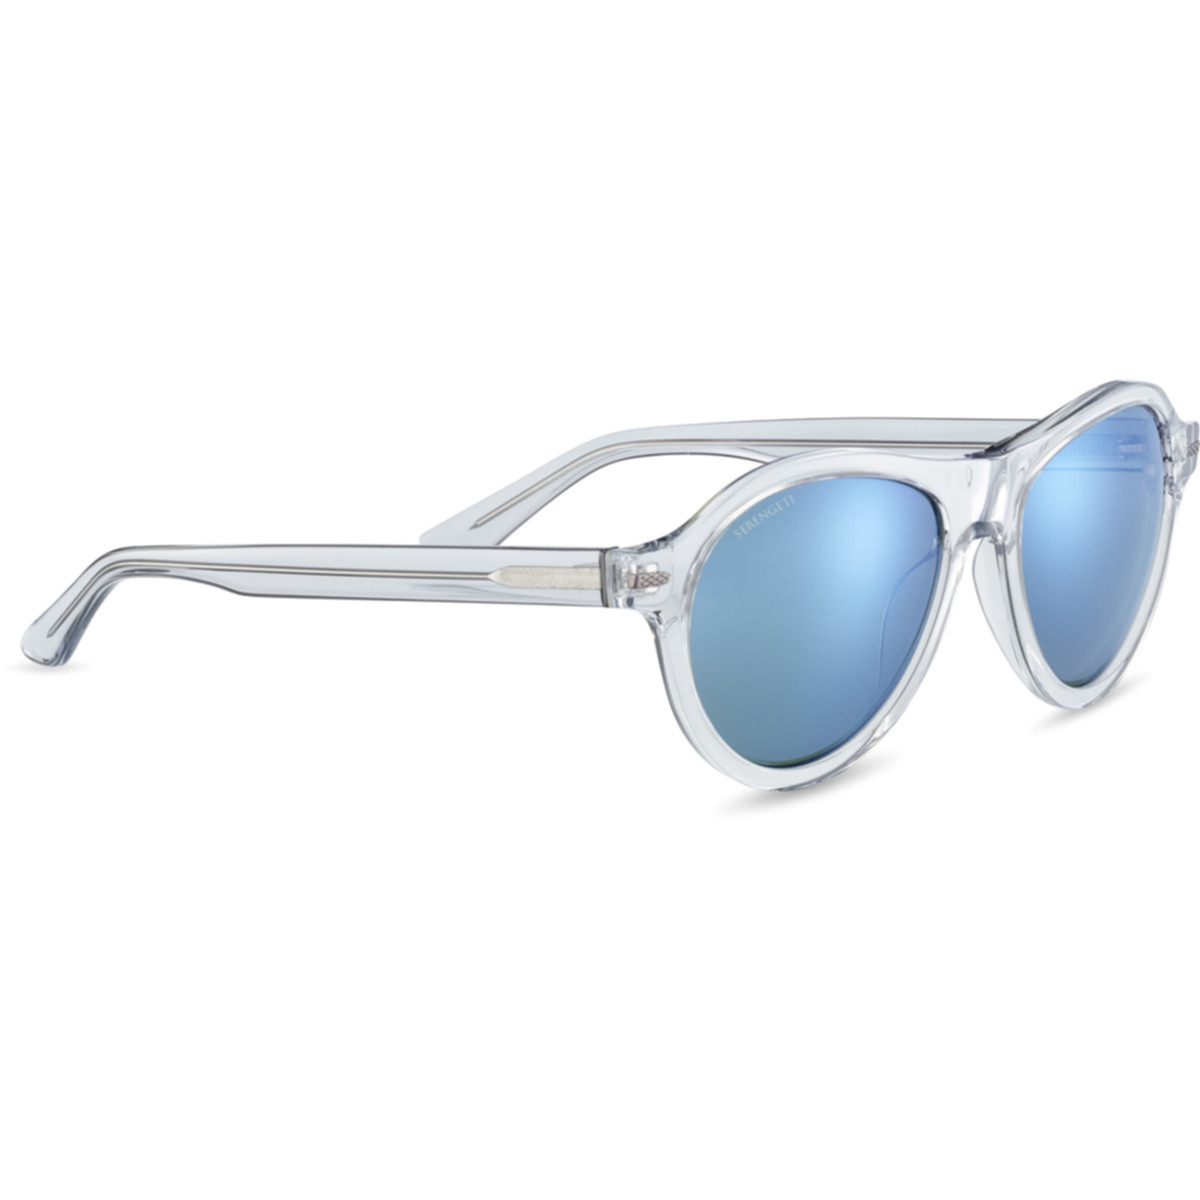 Danby_Crystal Grey-Mineral Polarized 555nm Blue Cat 2 to 3-01